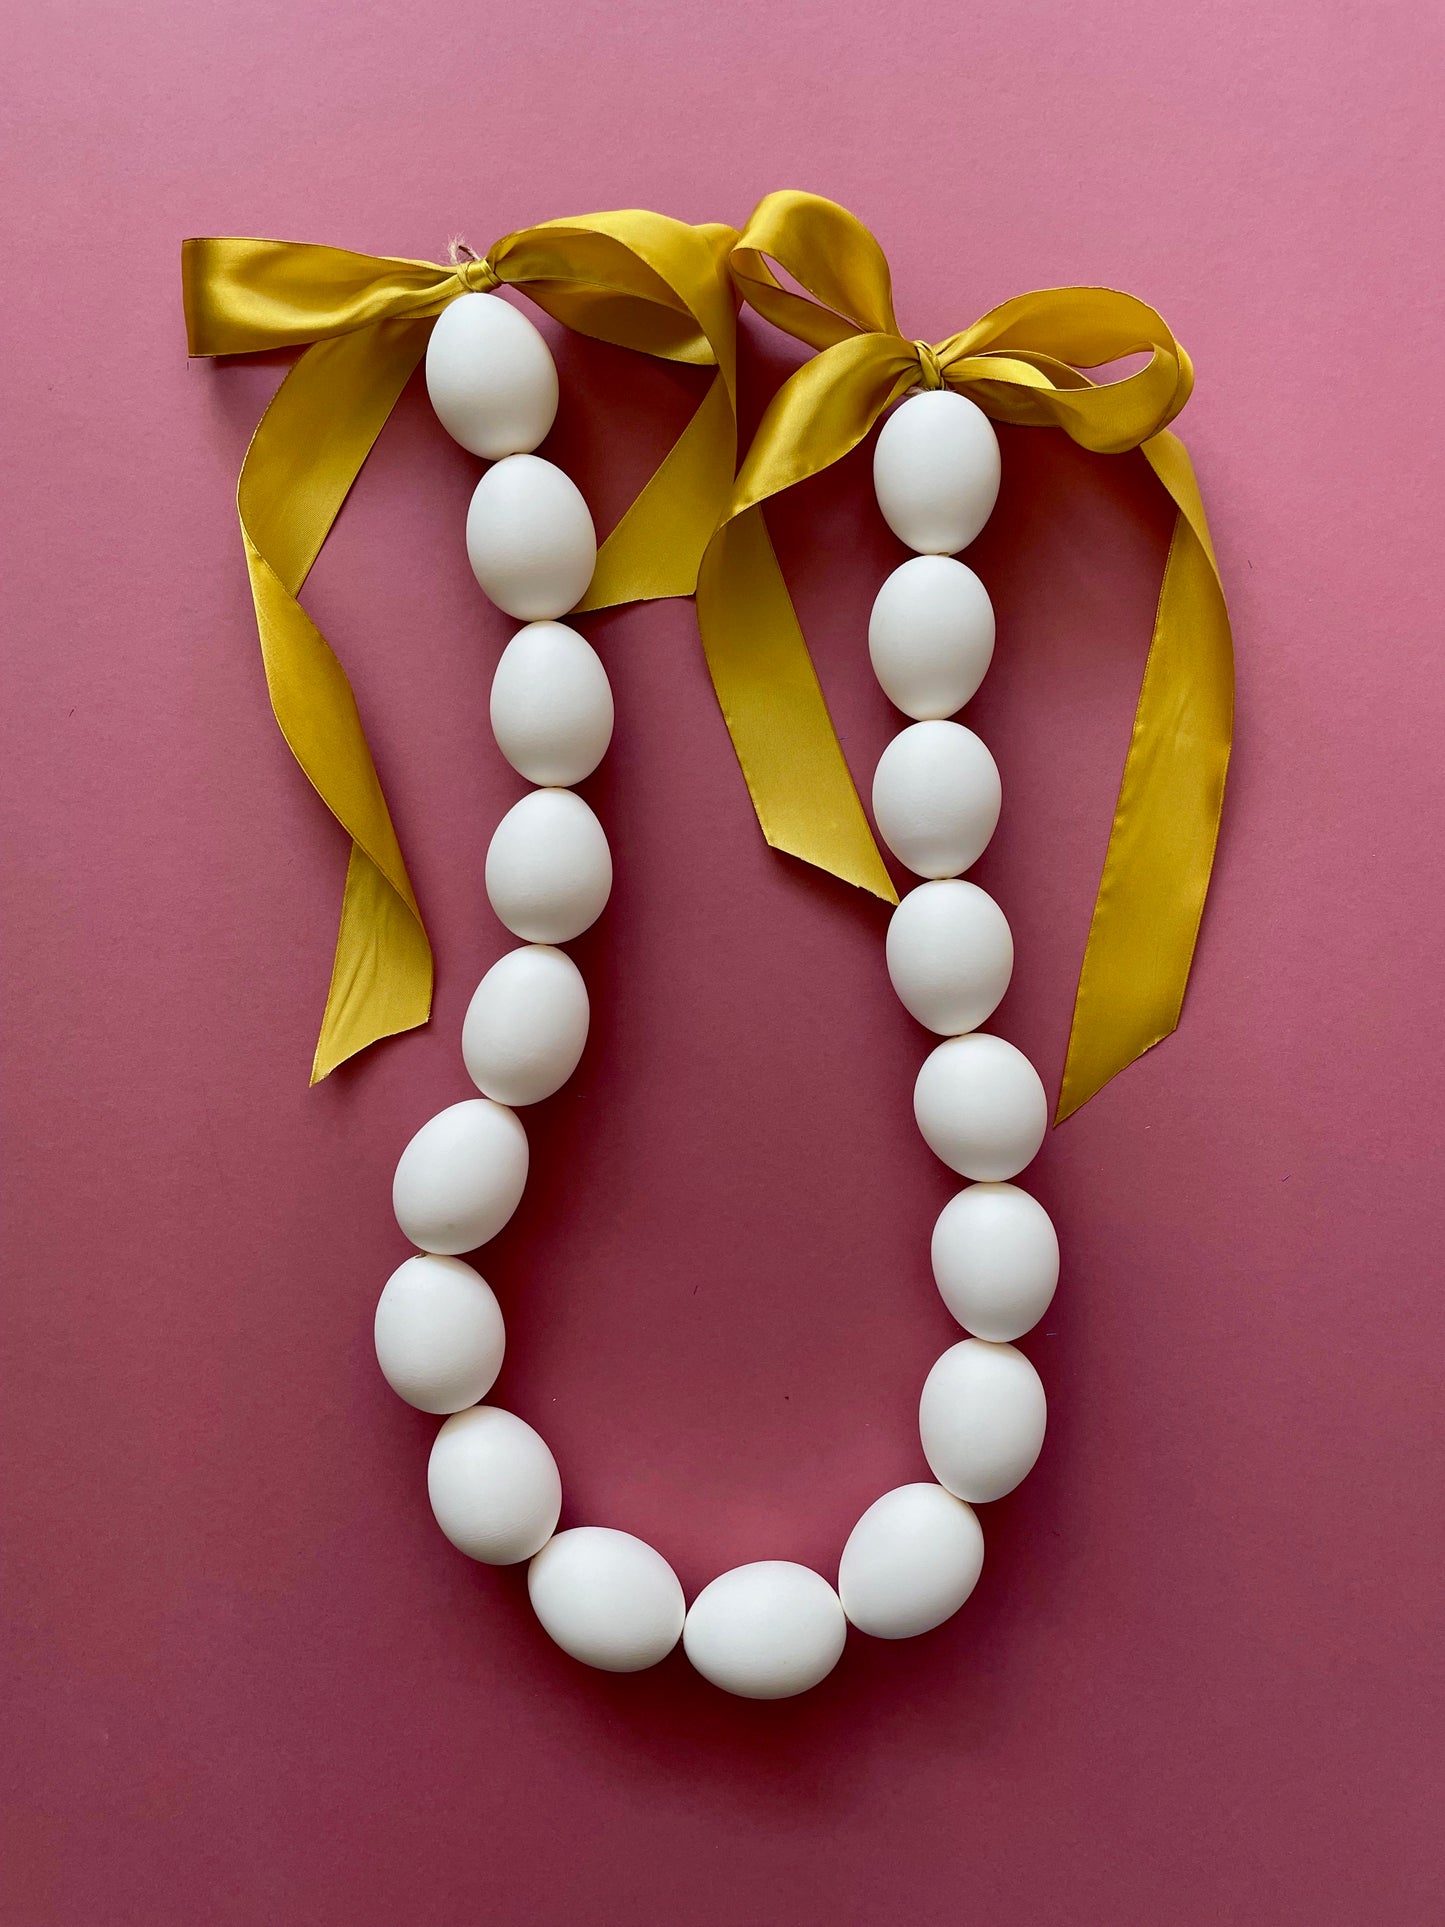 Egg Garland with Ribbons